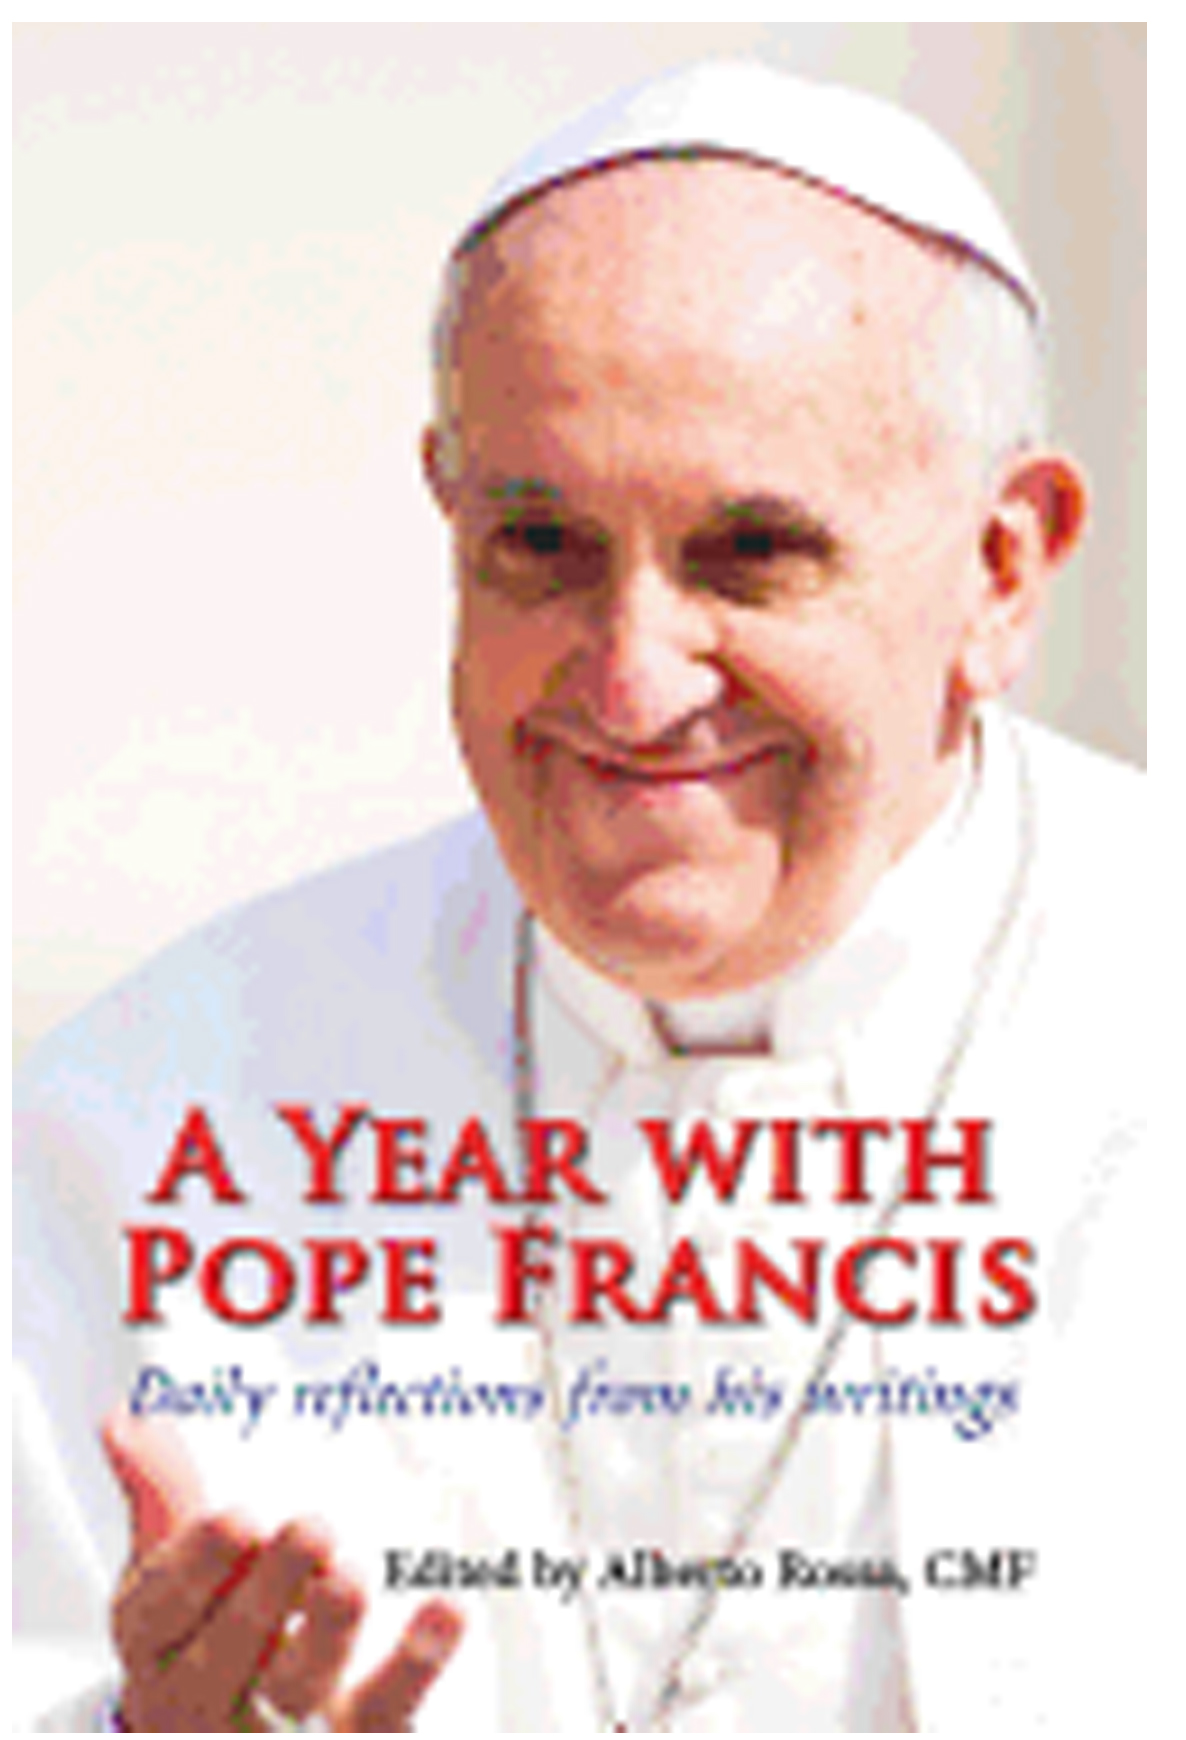 A Year With Pope Francis: Daily reflections from his writings by Alberto Rossa 108-9780809148899